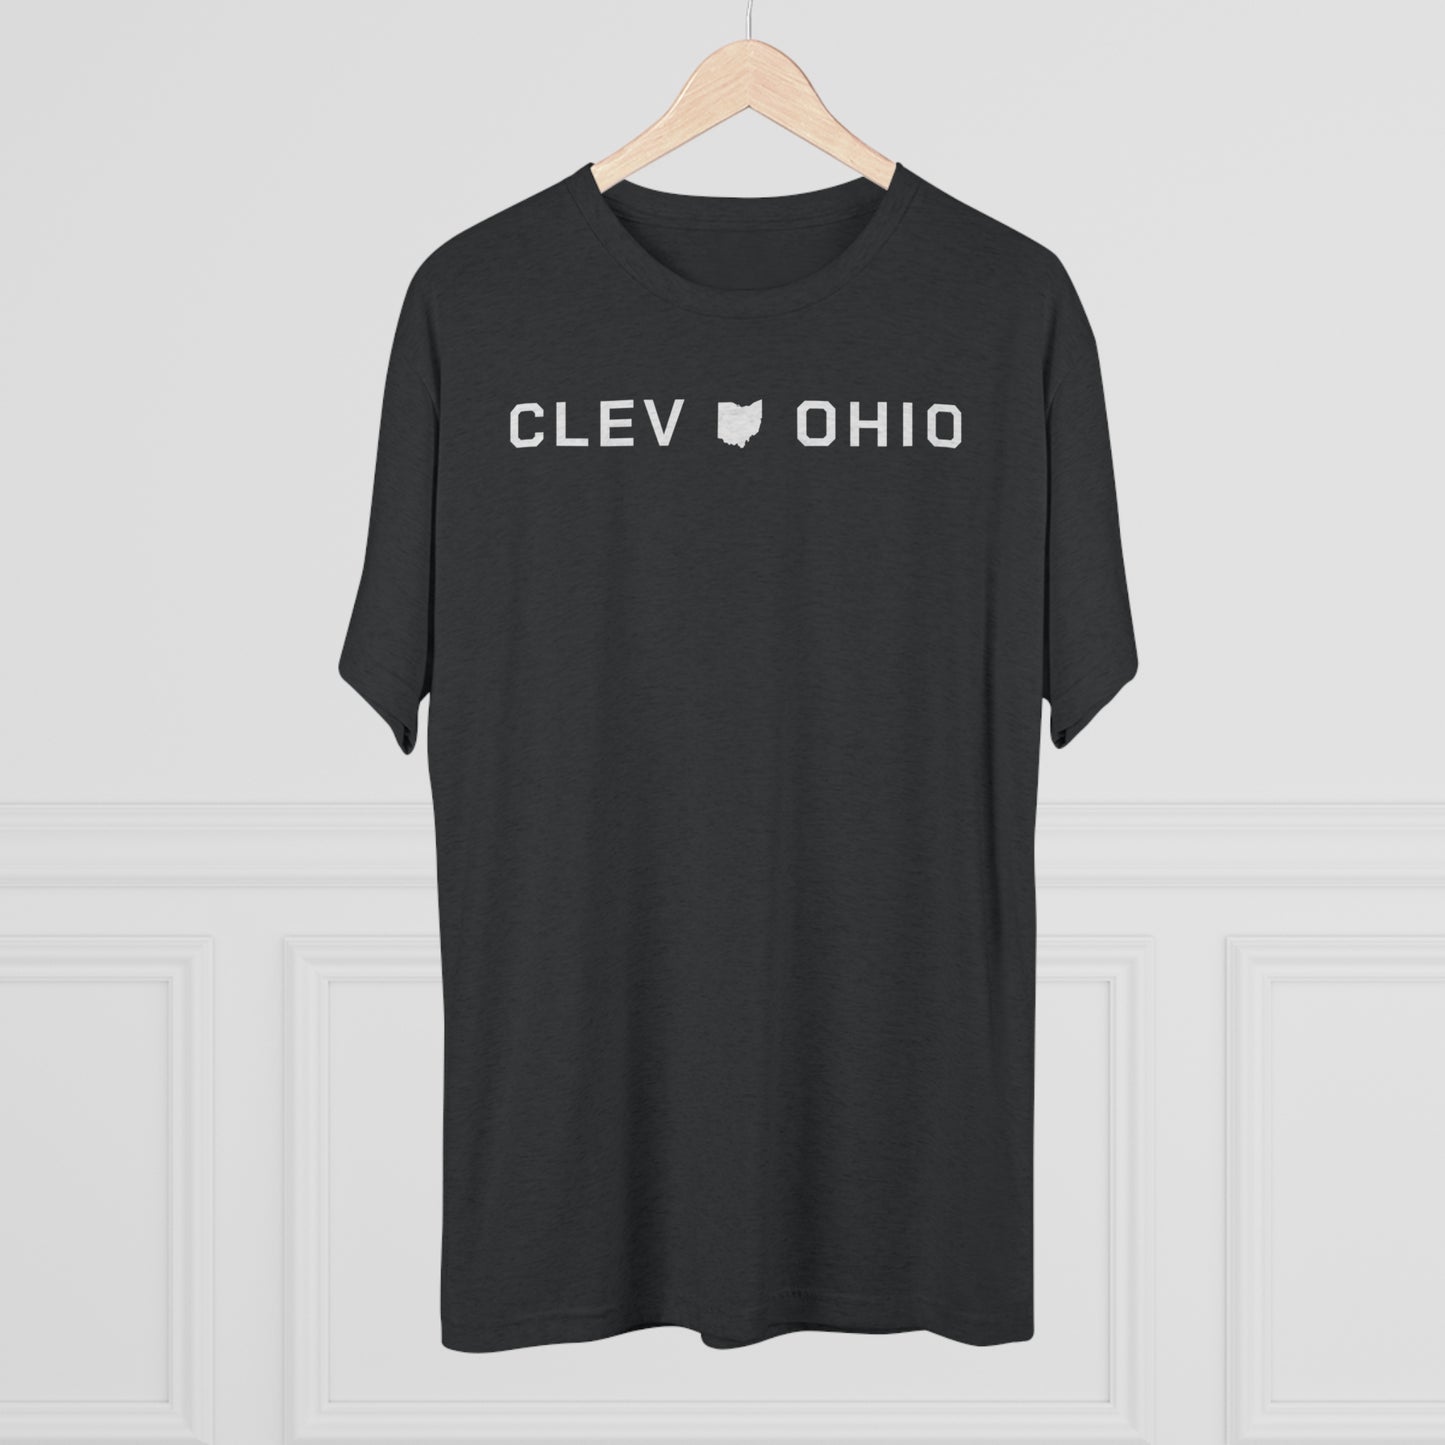 CLEV (state shape) OHIO - Unisex Tri-Blend Crew Tee